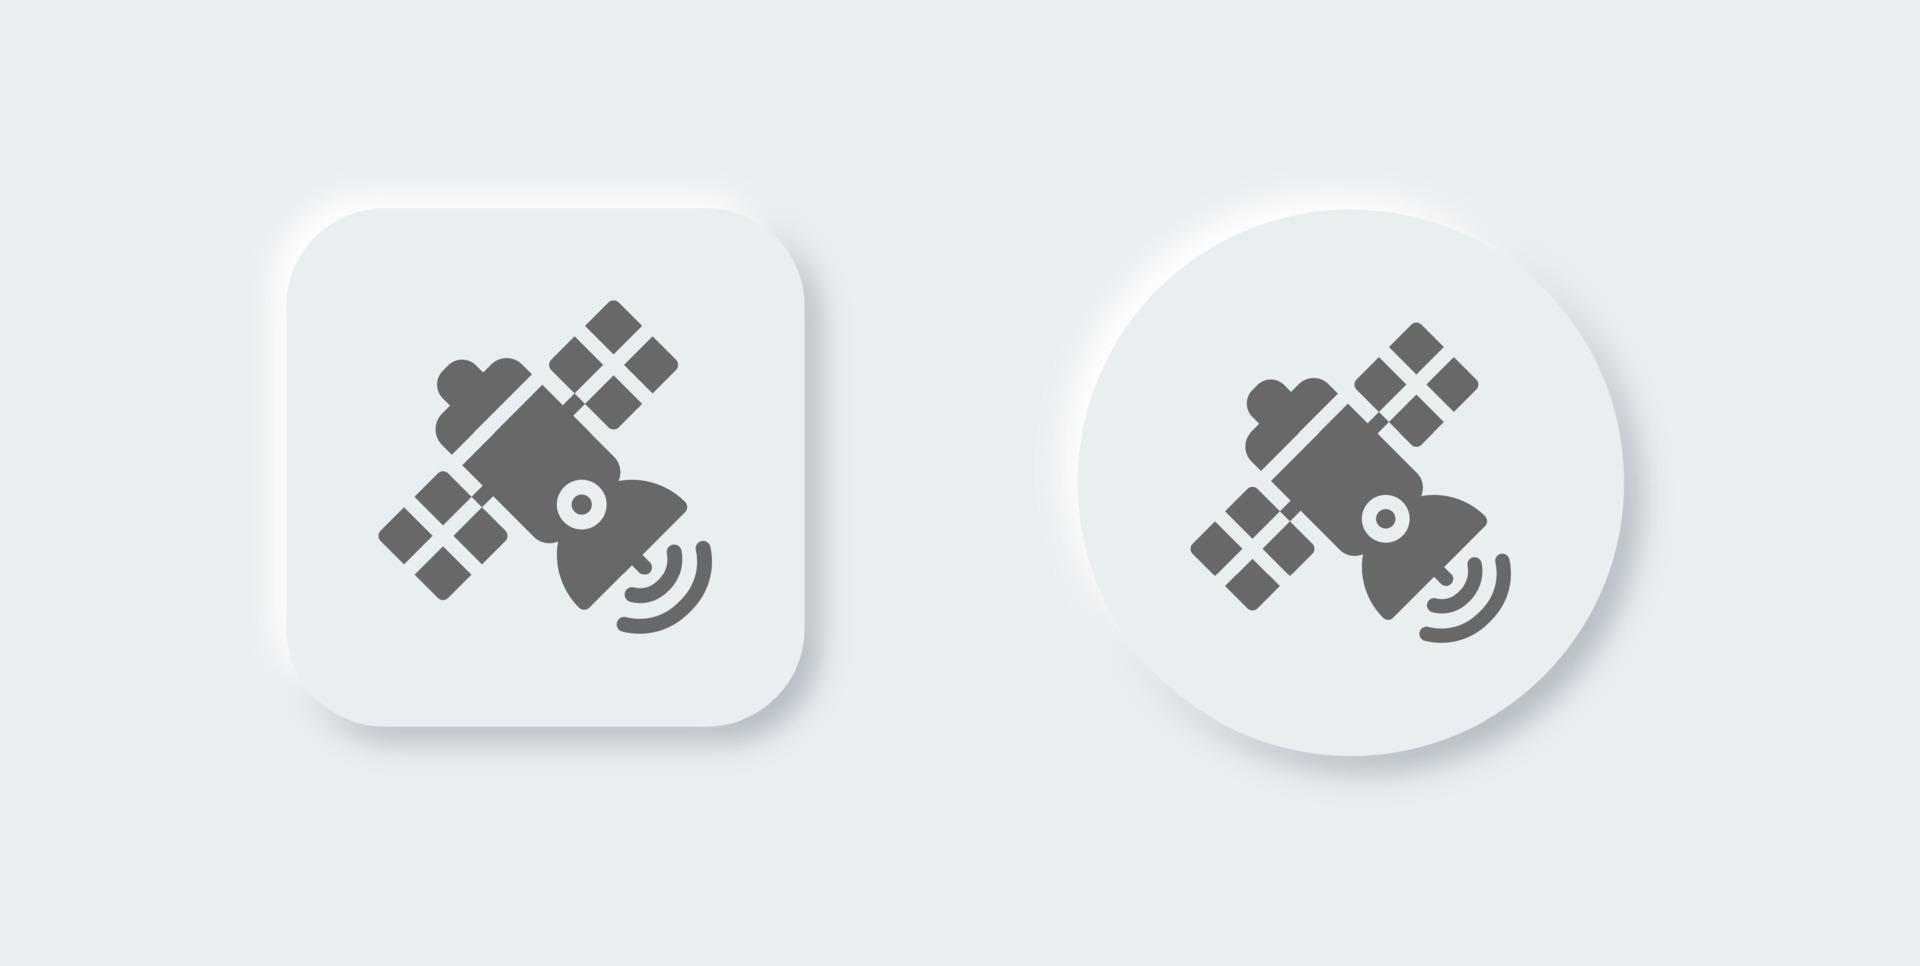 Satellite solid icon in neomorphic design style. Antenna signs vector illustration.